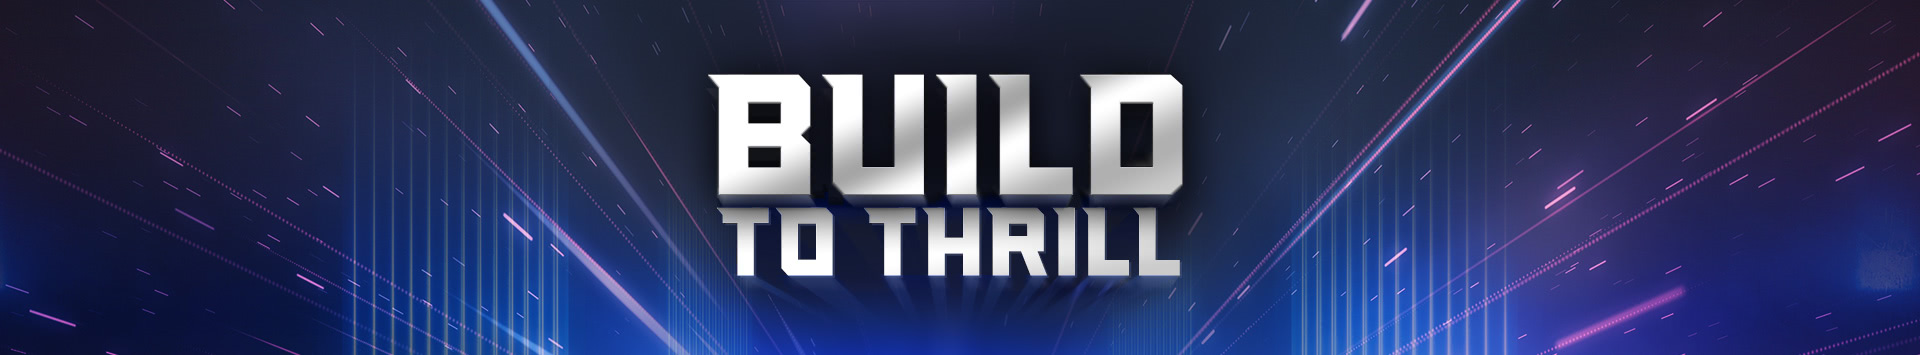 Build to Thrill